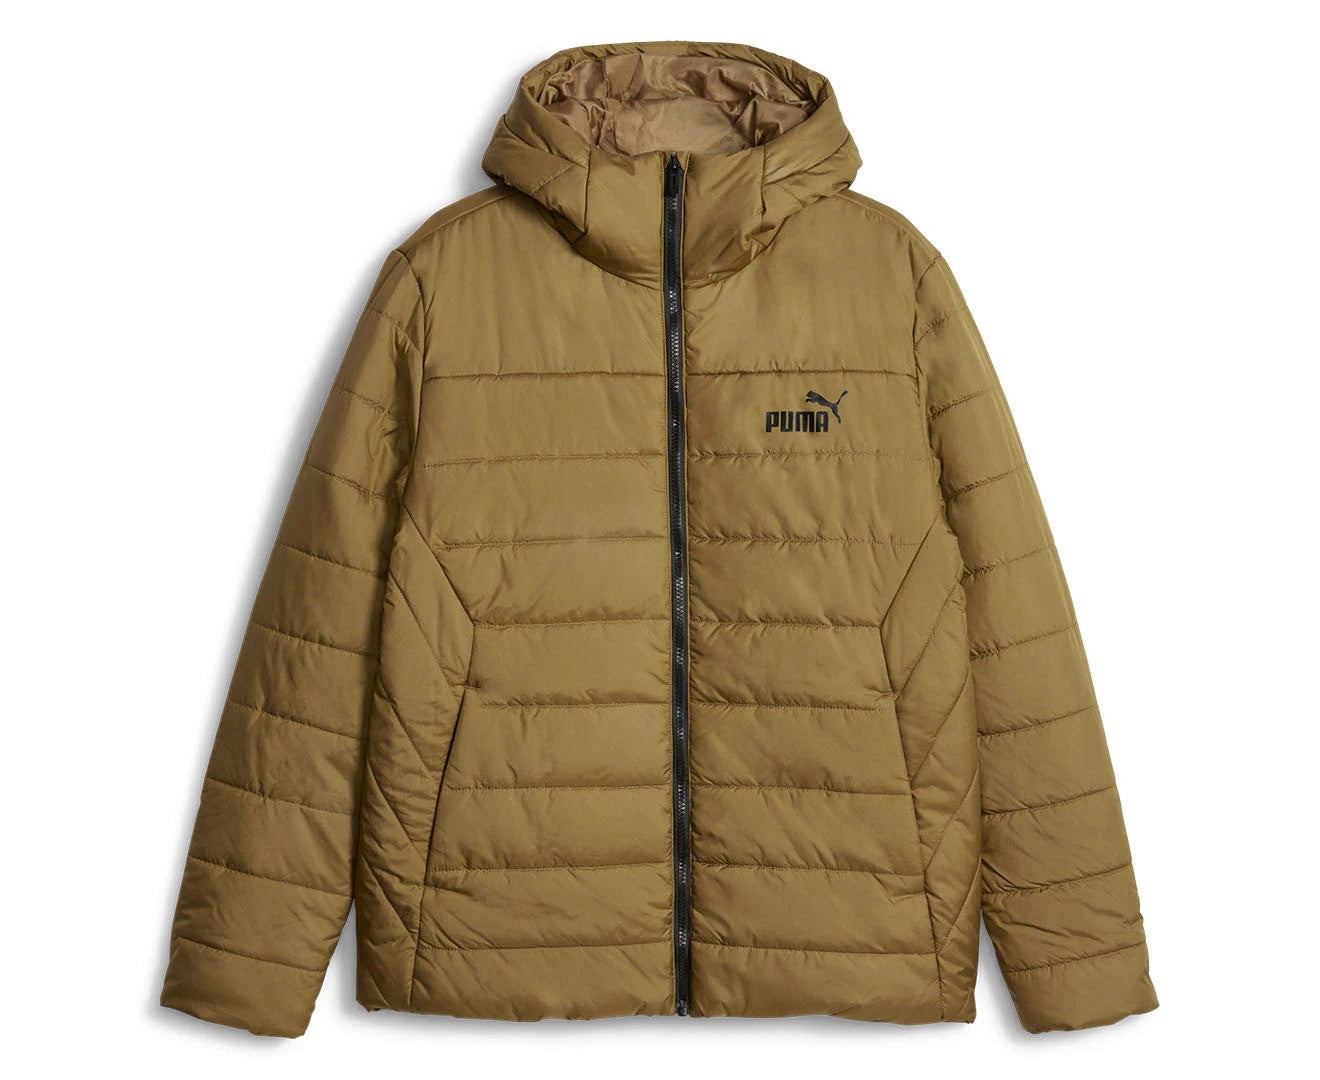 Puma Men's Essentials Hooded Padded Jacket - Chocolate Chip